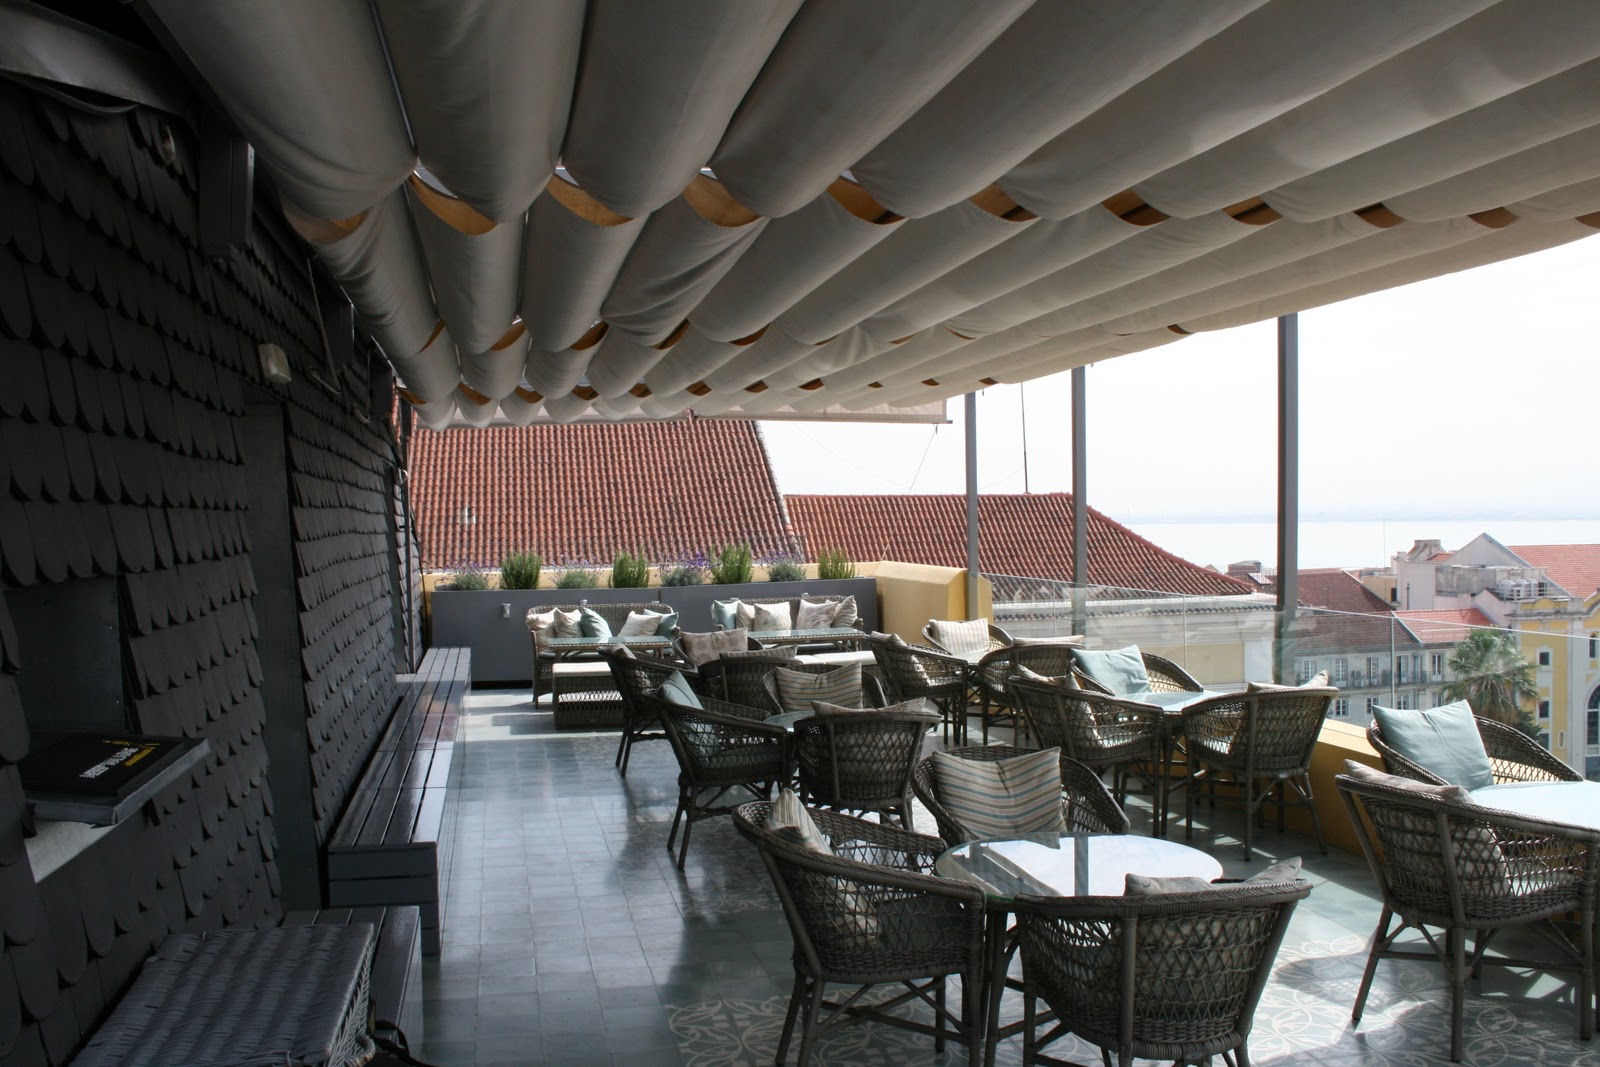 The Best Rooftop Bars in Portugal best rooftop bars in portugal The Best Rooftop Bars in Portugal Terra  o BA